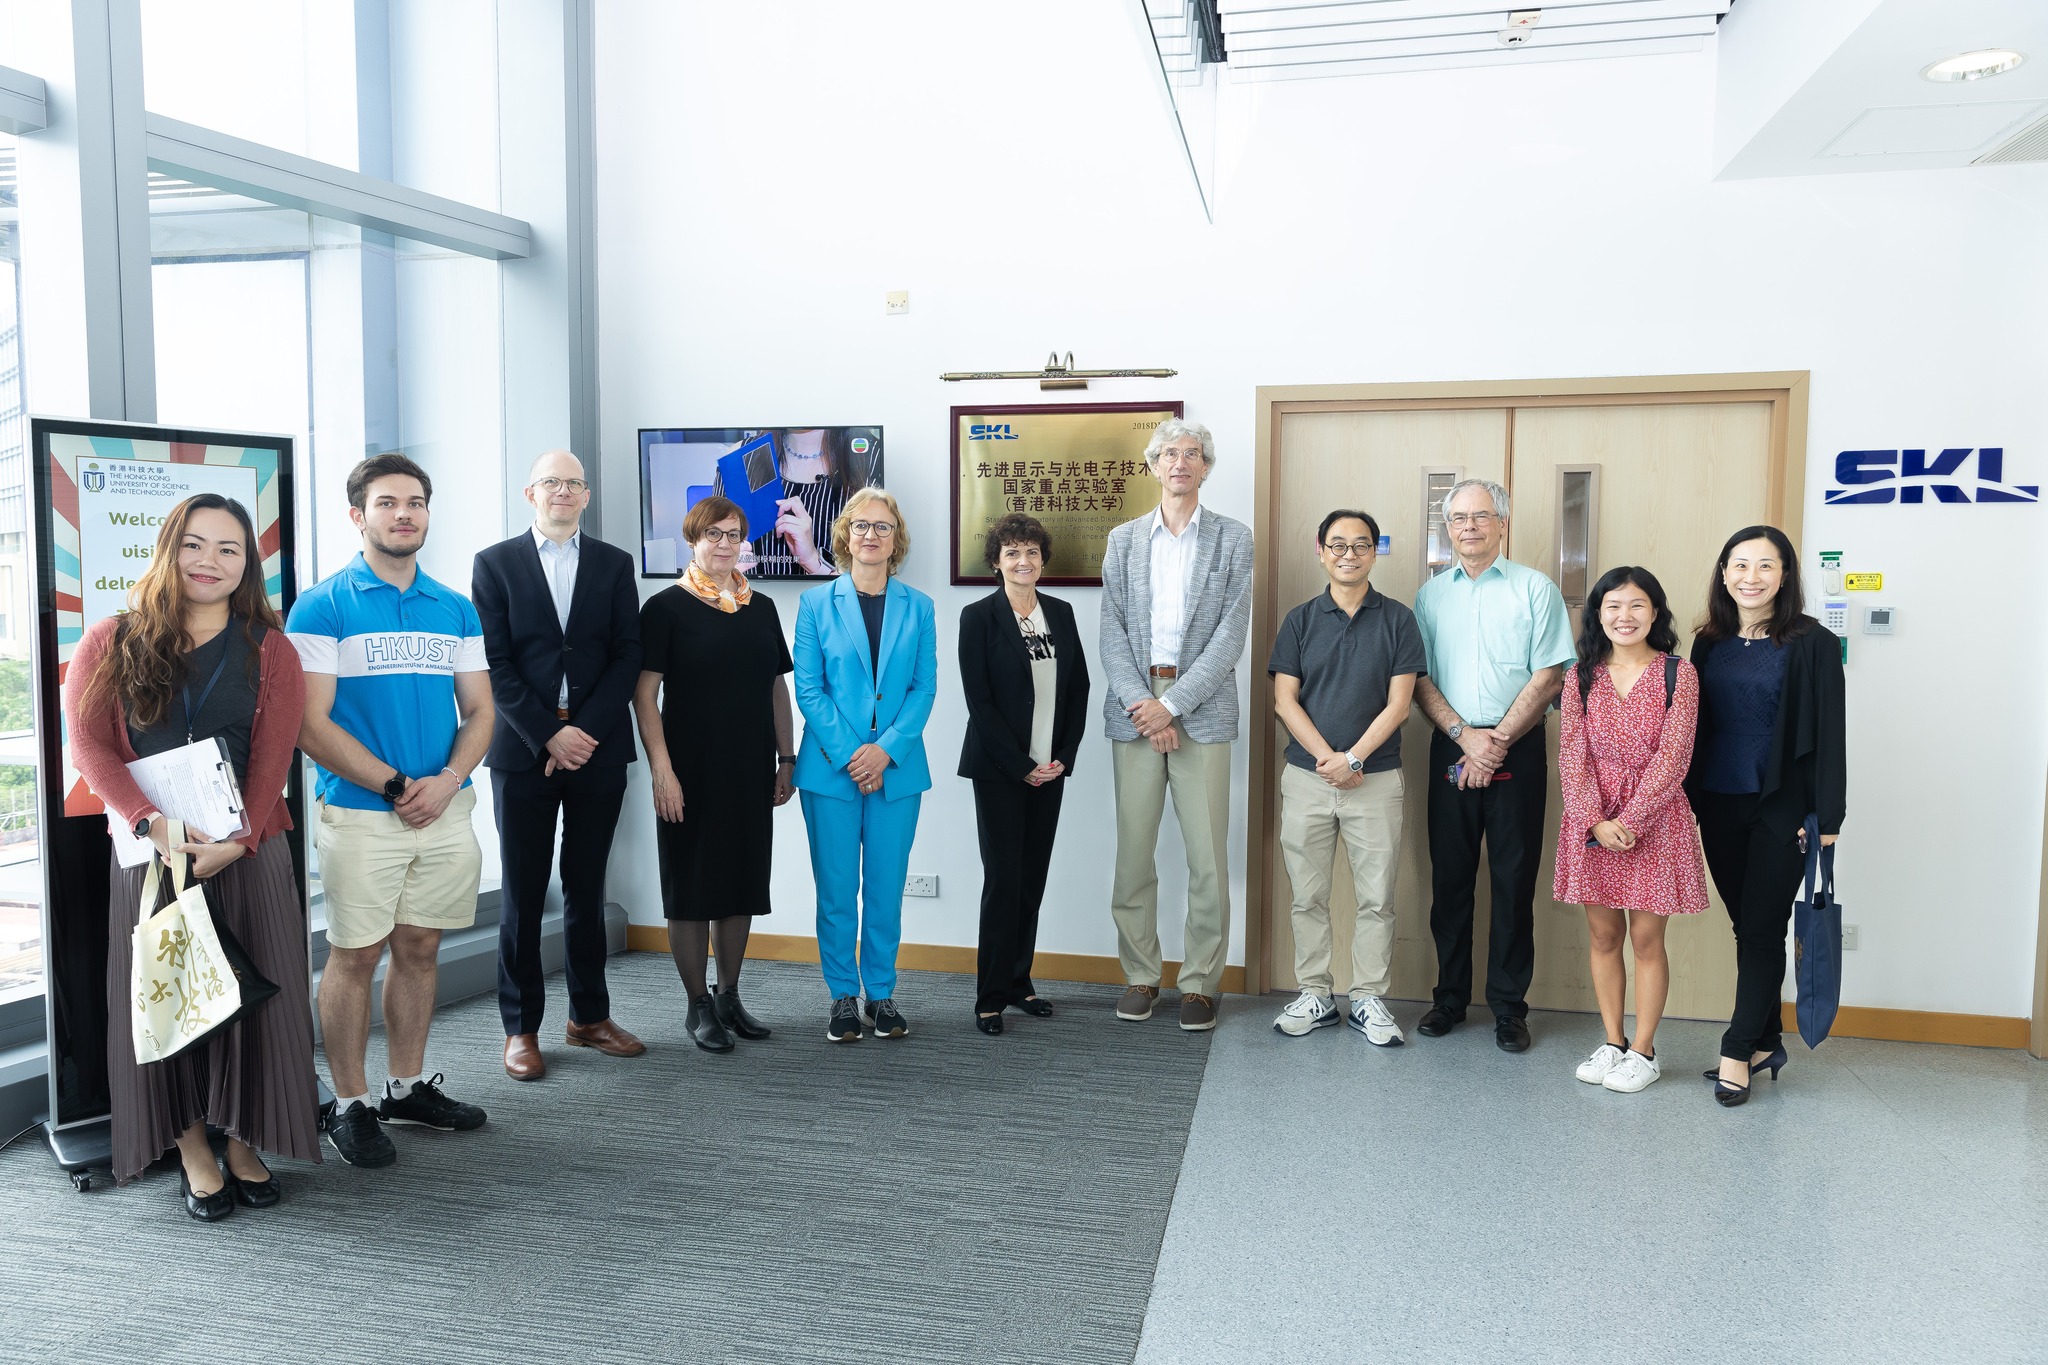 The German Research Foundation delegation tours the State Key Laboratory of Advanced Displays and Optoelectronics Technologies.